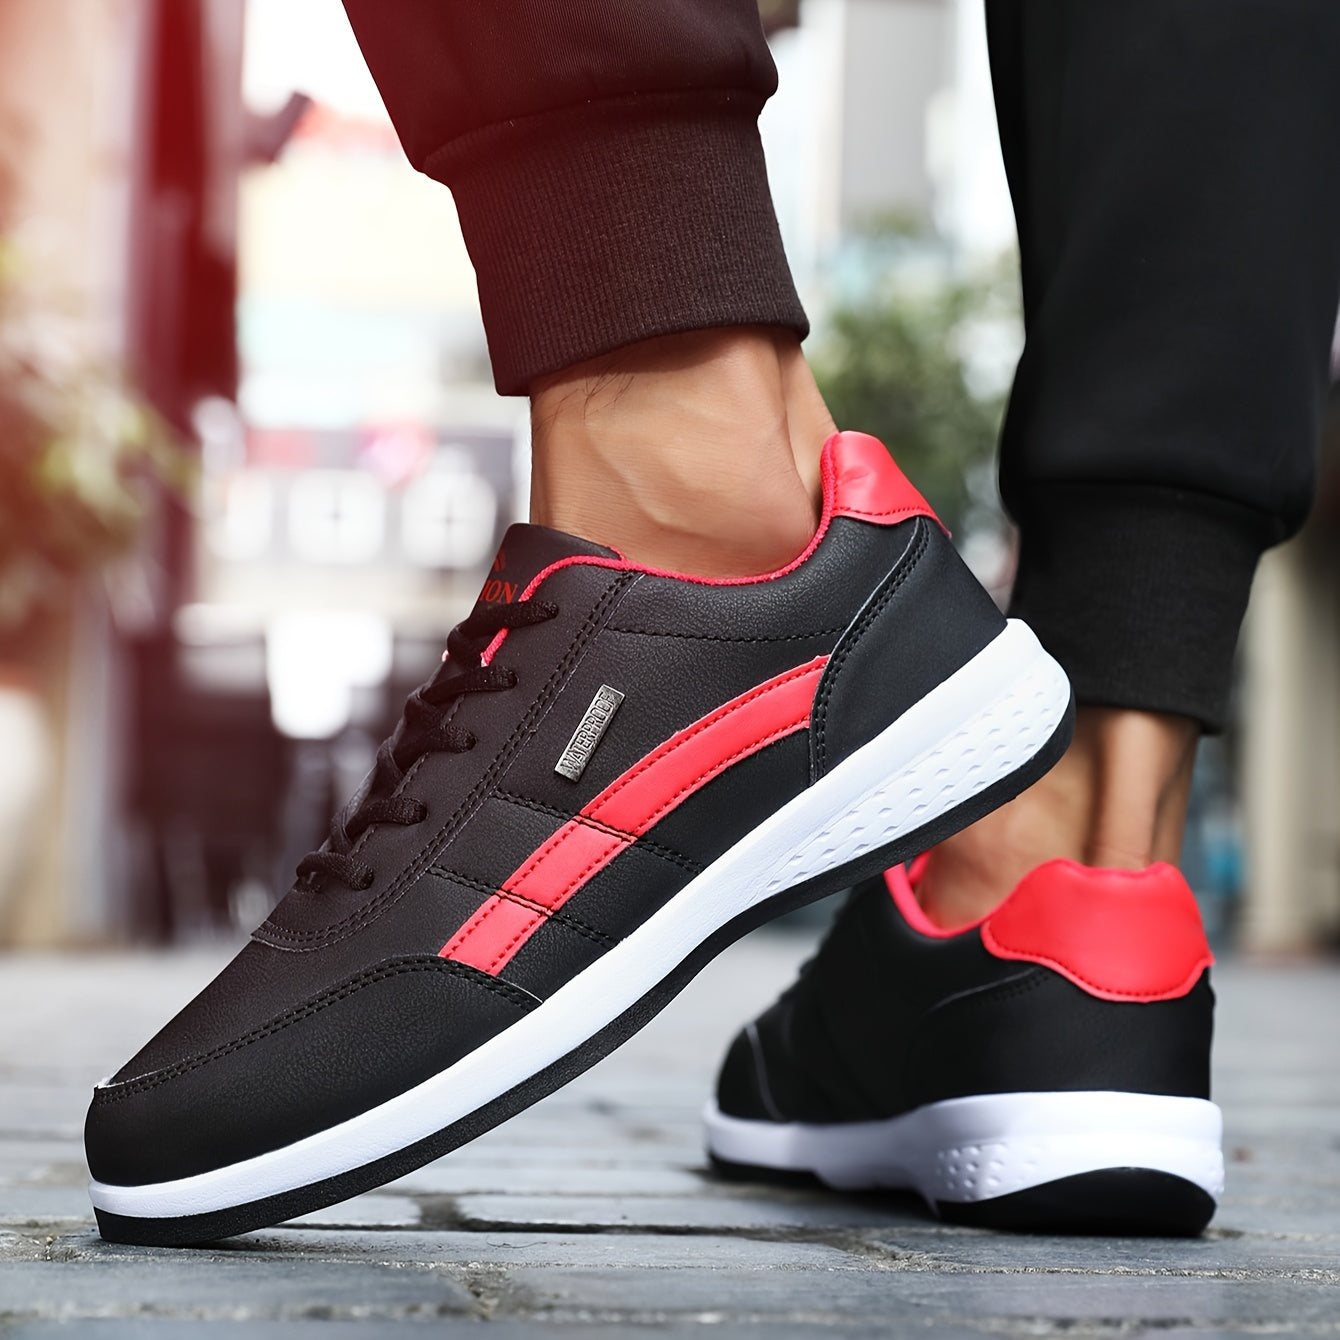 Men's Lace-up Sneakers - Athletic Shoes - Wear-resistant And Breathable